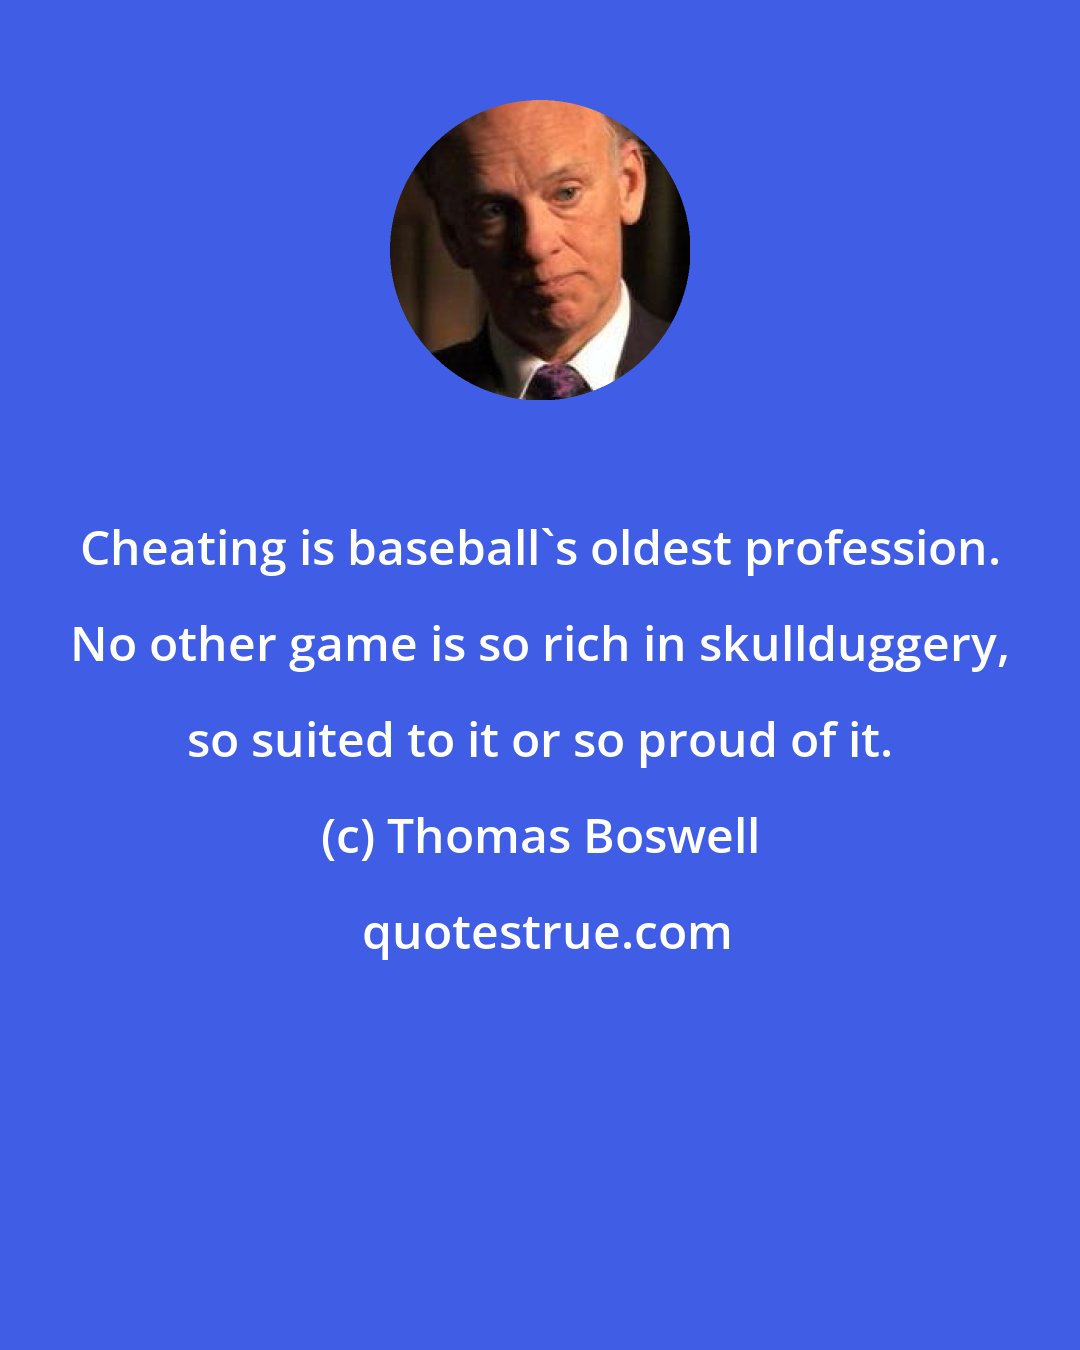 Thomas Boswell: Cheating is baseball's oldest profession. No other game is so rich in skullduggery, so suited to it or so proud of it.